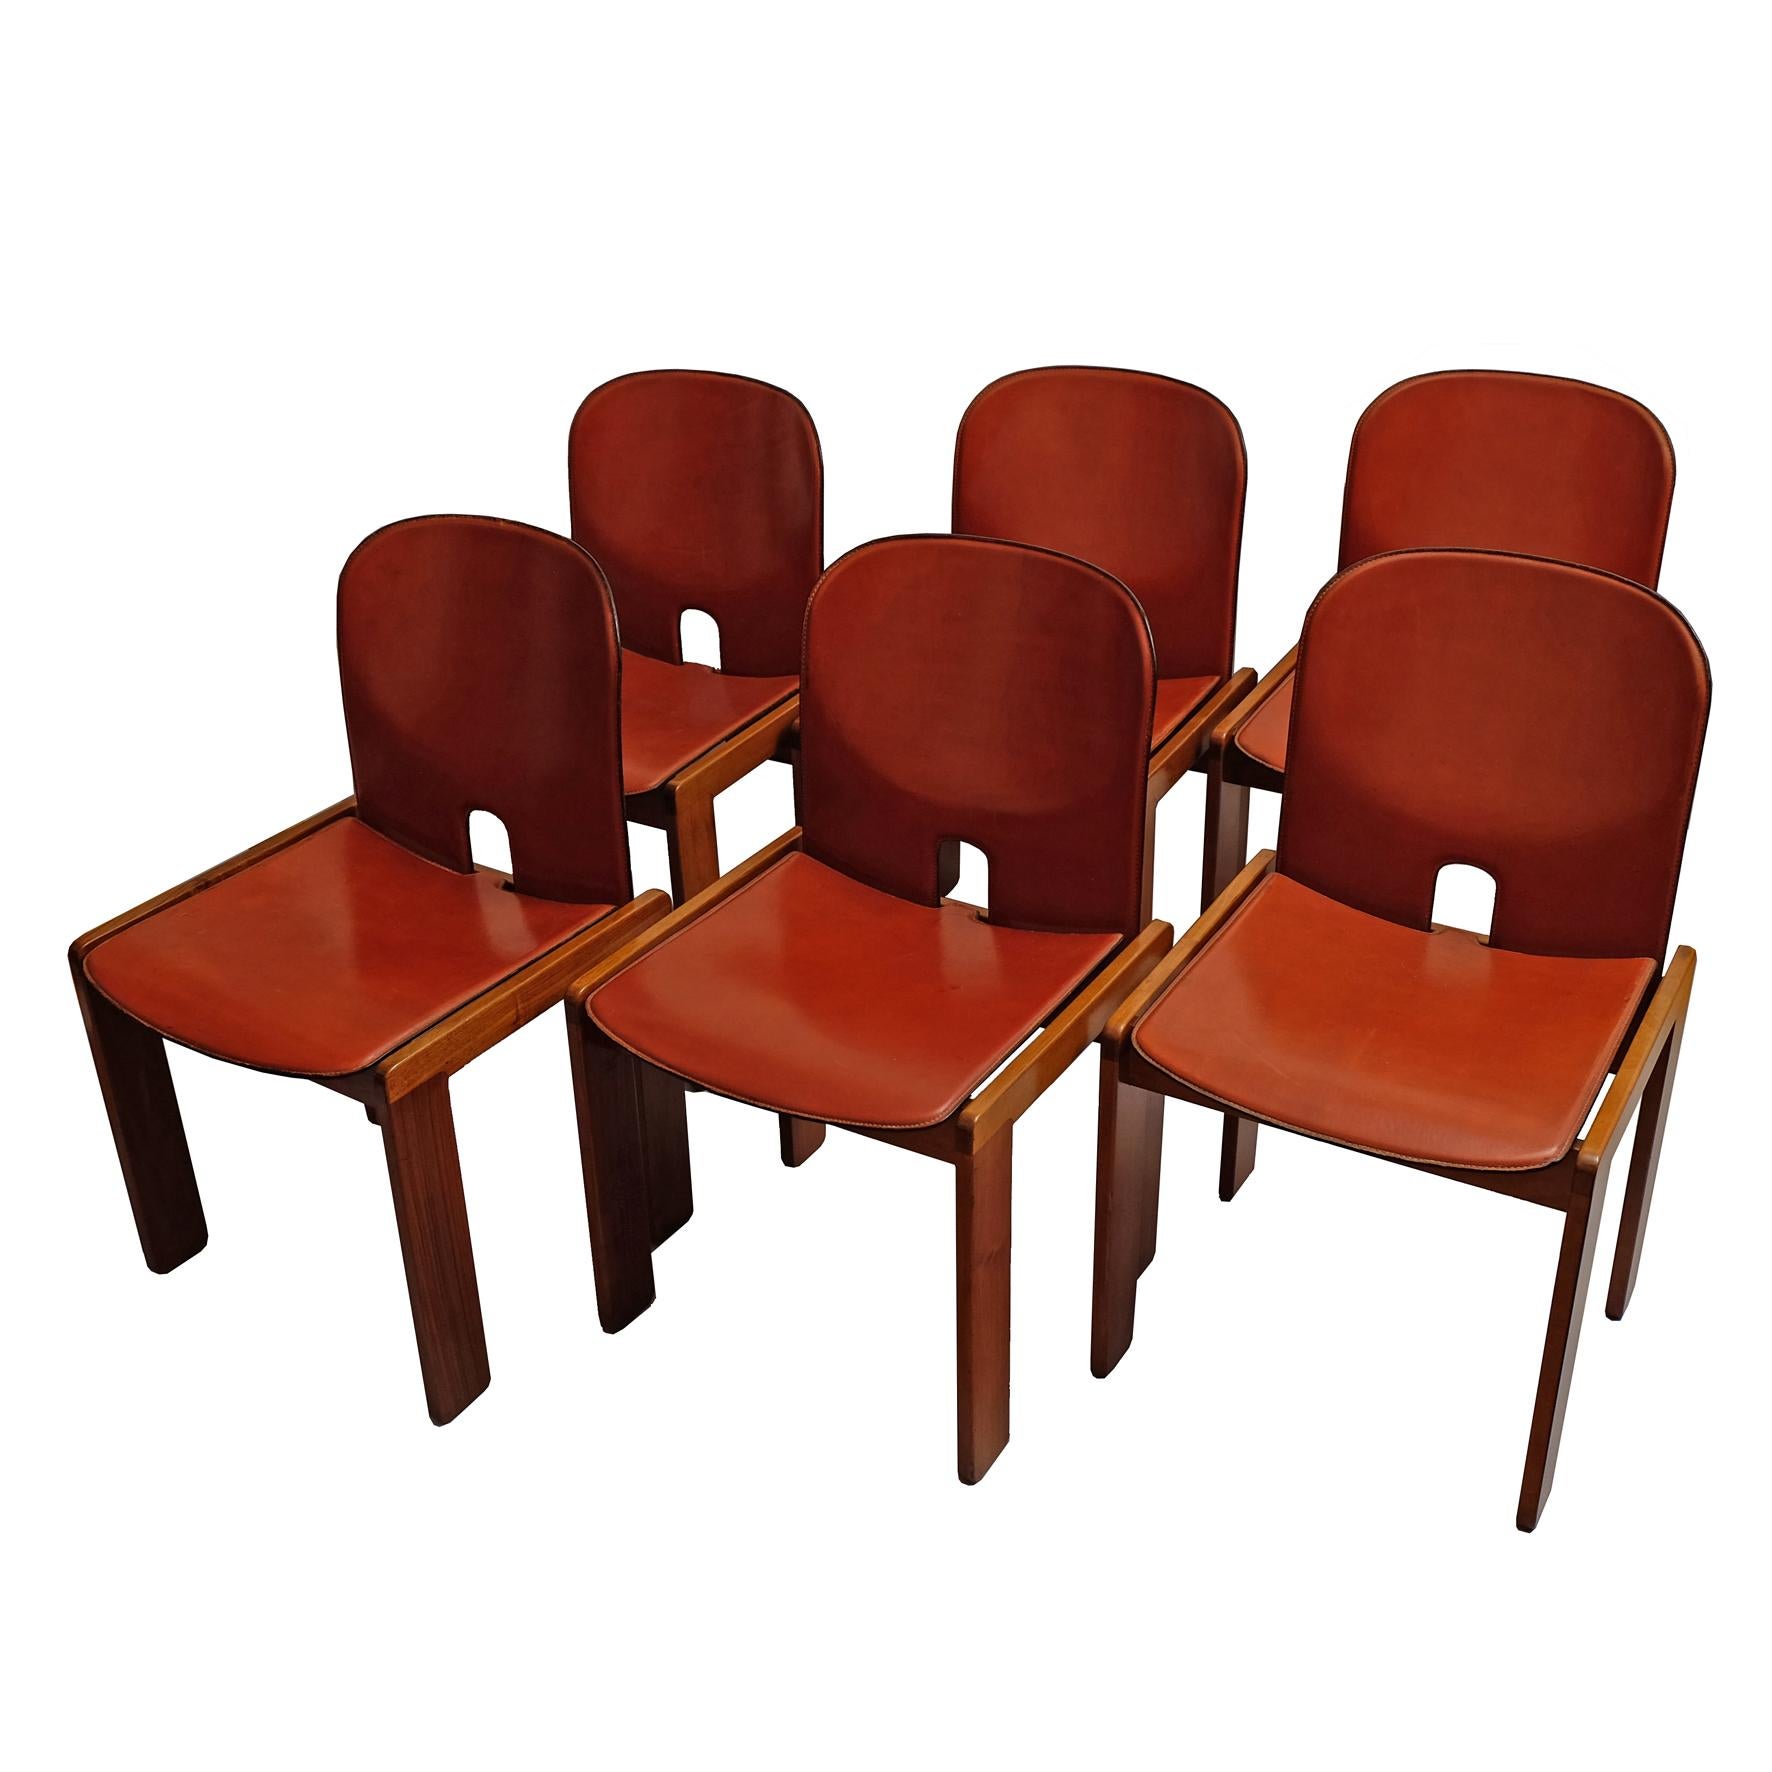 Afra & Tobia Scarpa, a Set of Six Chairs, Model 121, Cassina, 1960s